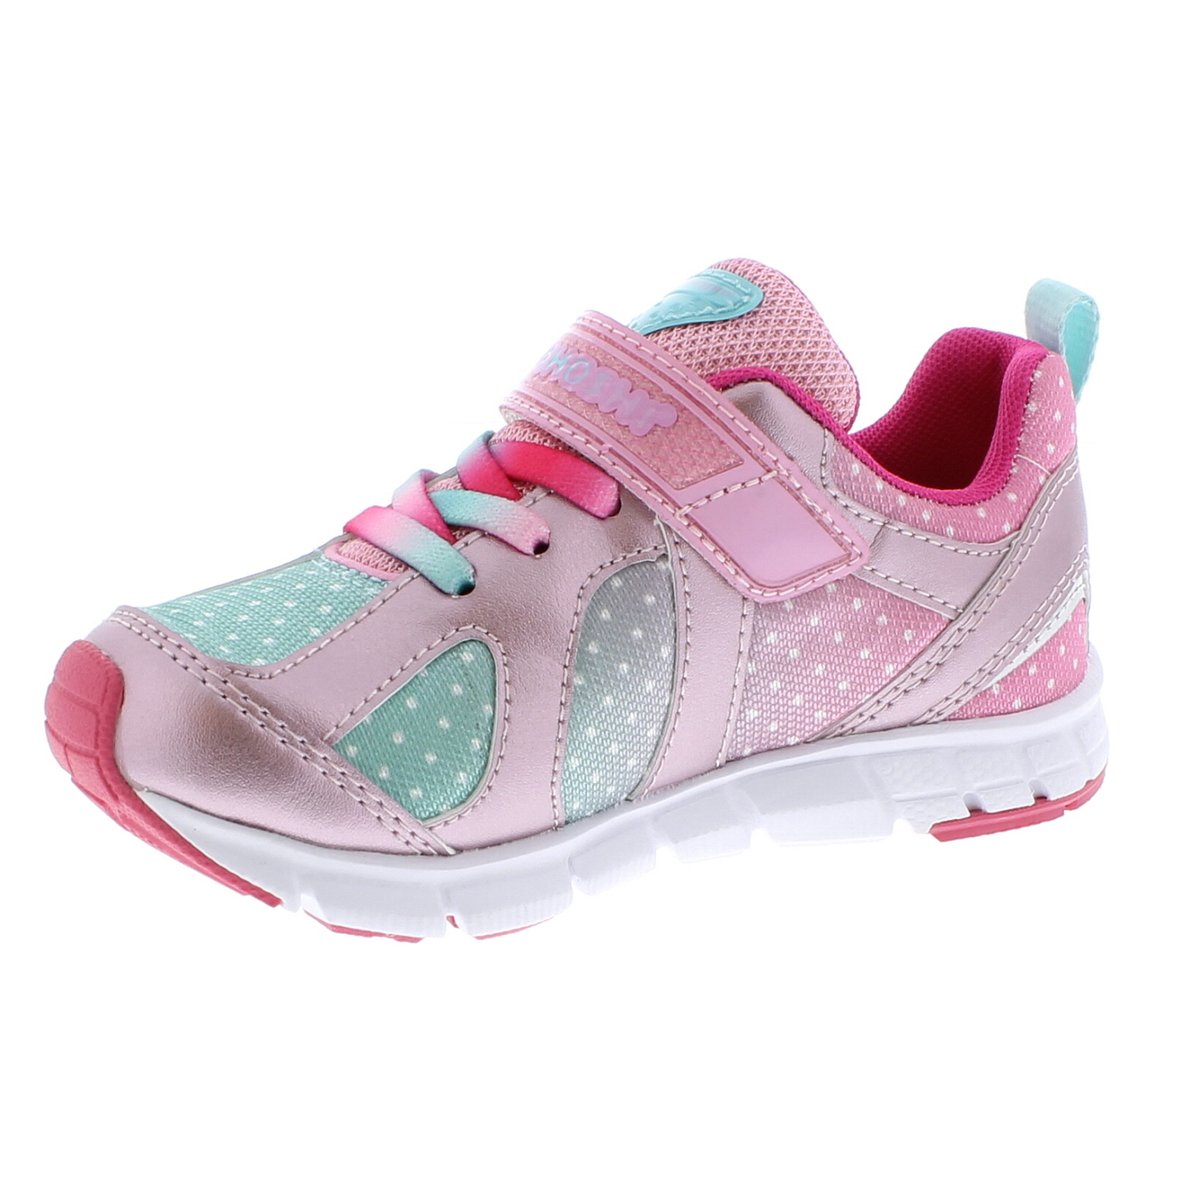 Child Tsukihoshi Rainbow Sneaker in Rose/Mint from the front view